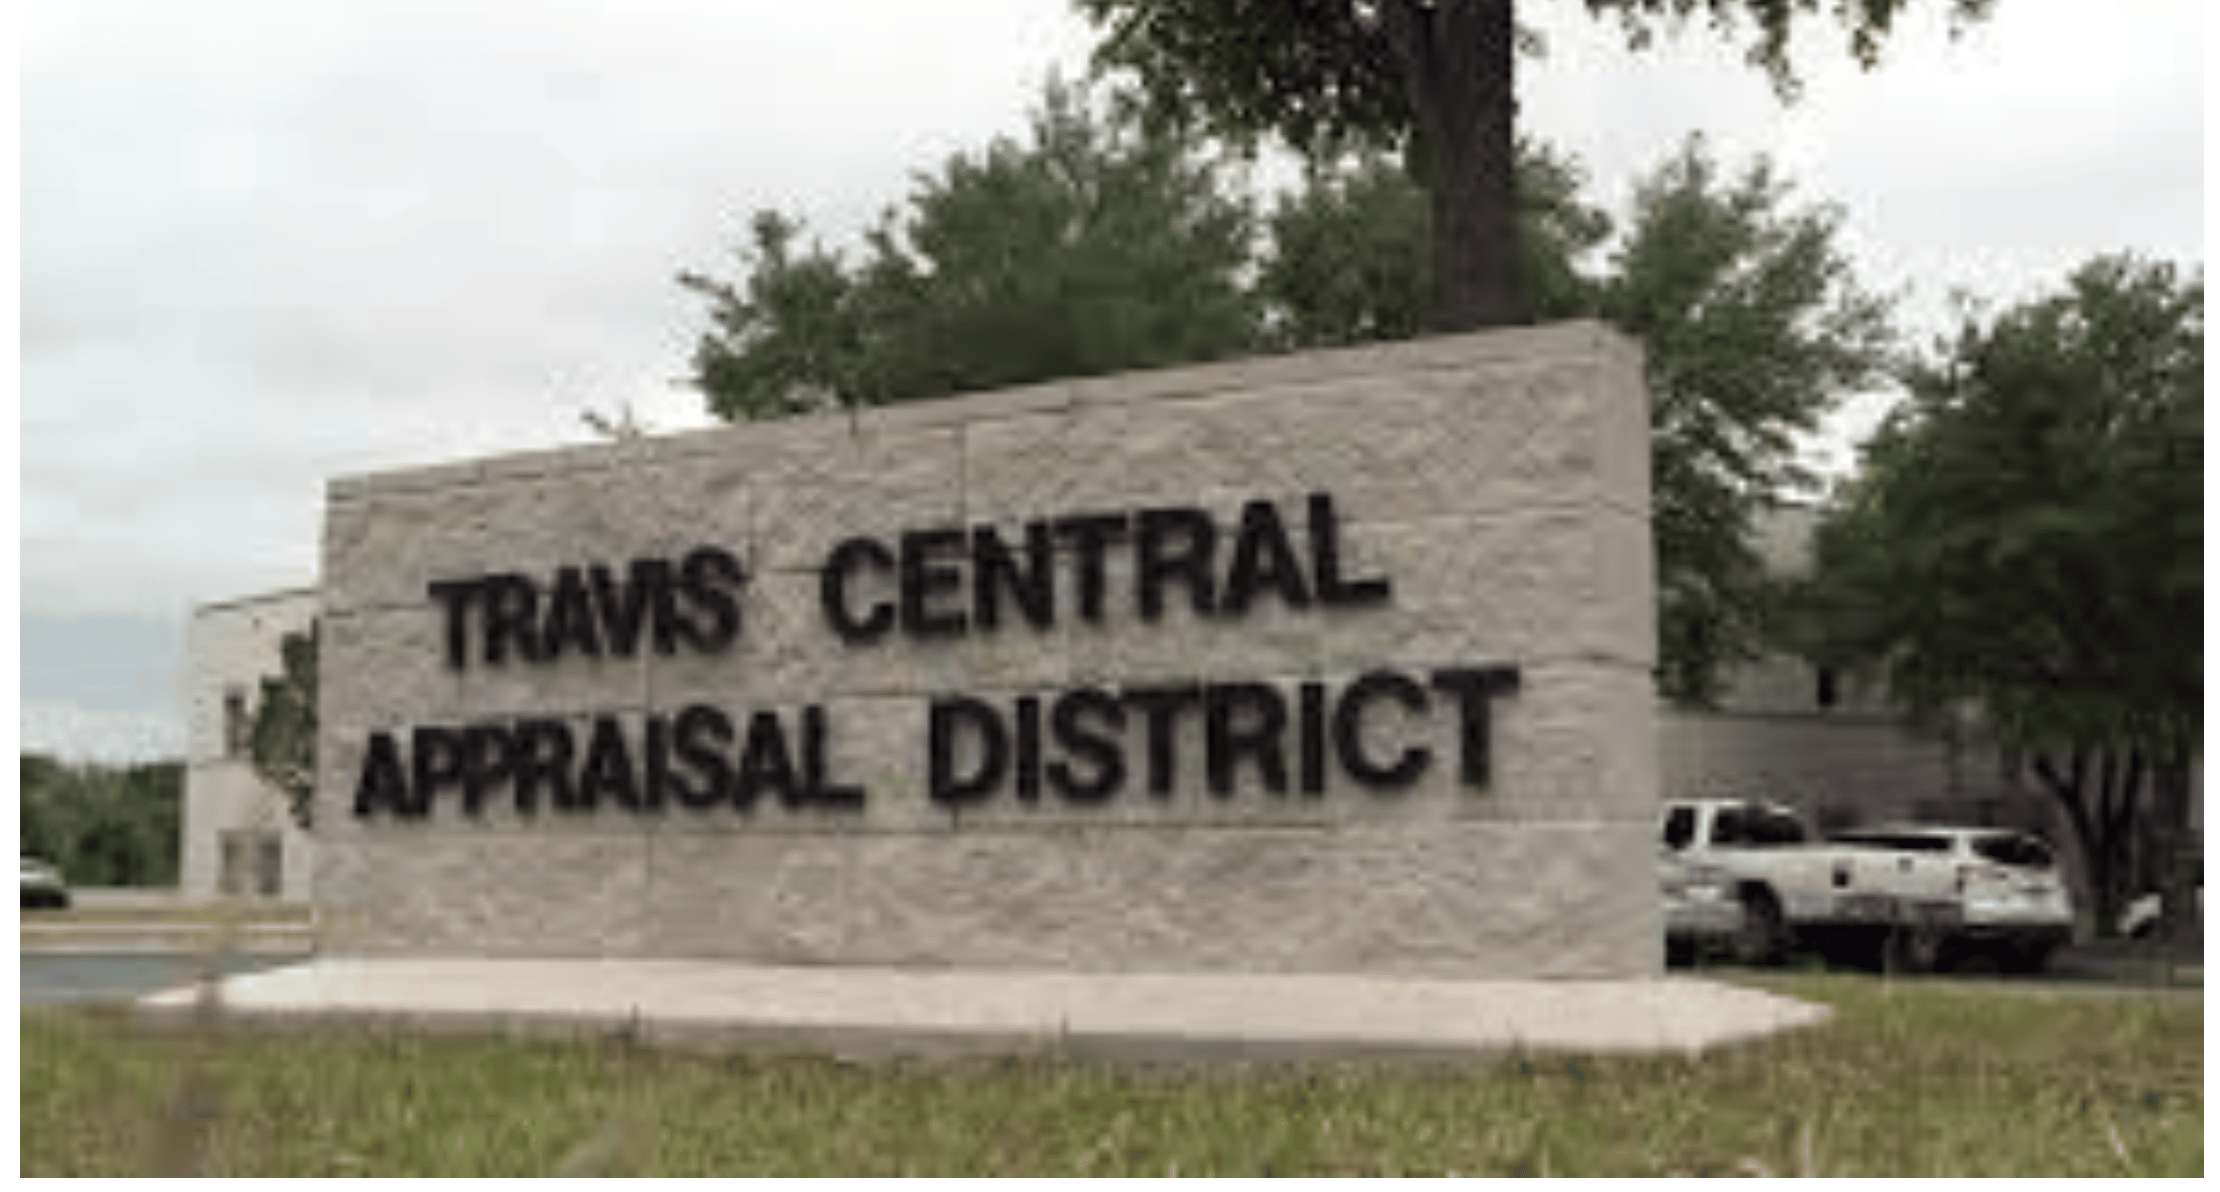 Travis Central Appraisal District is Slammed by the Judge